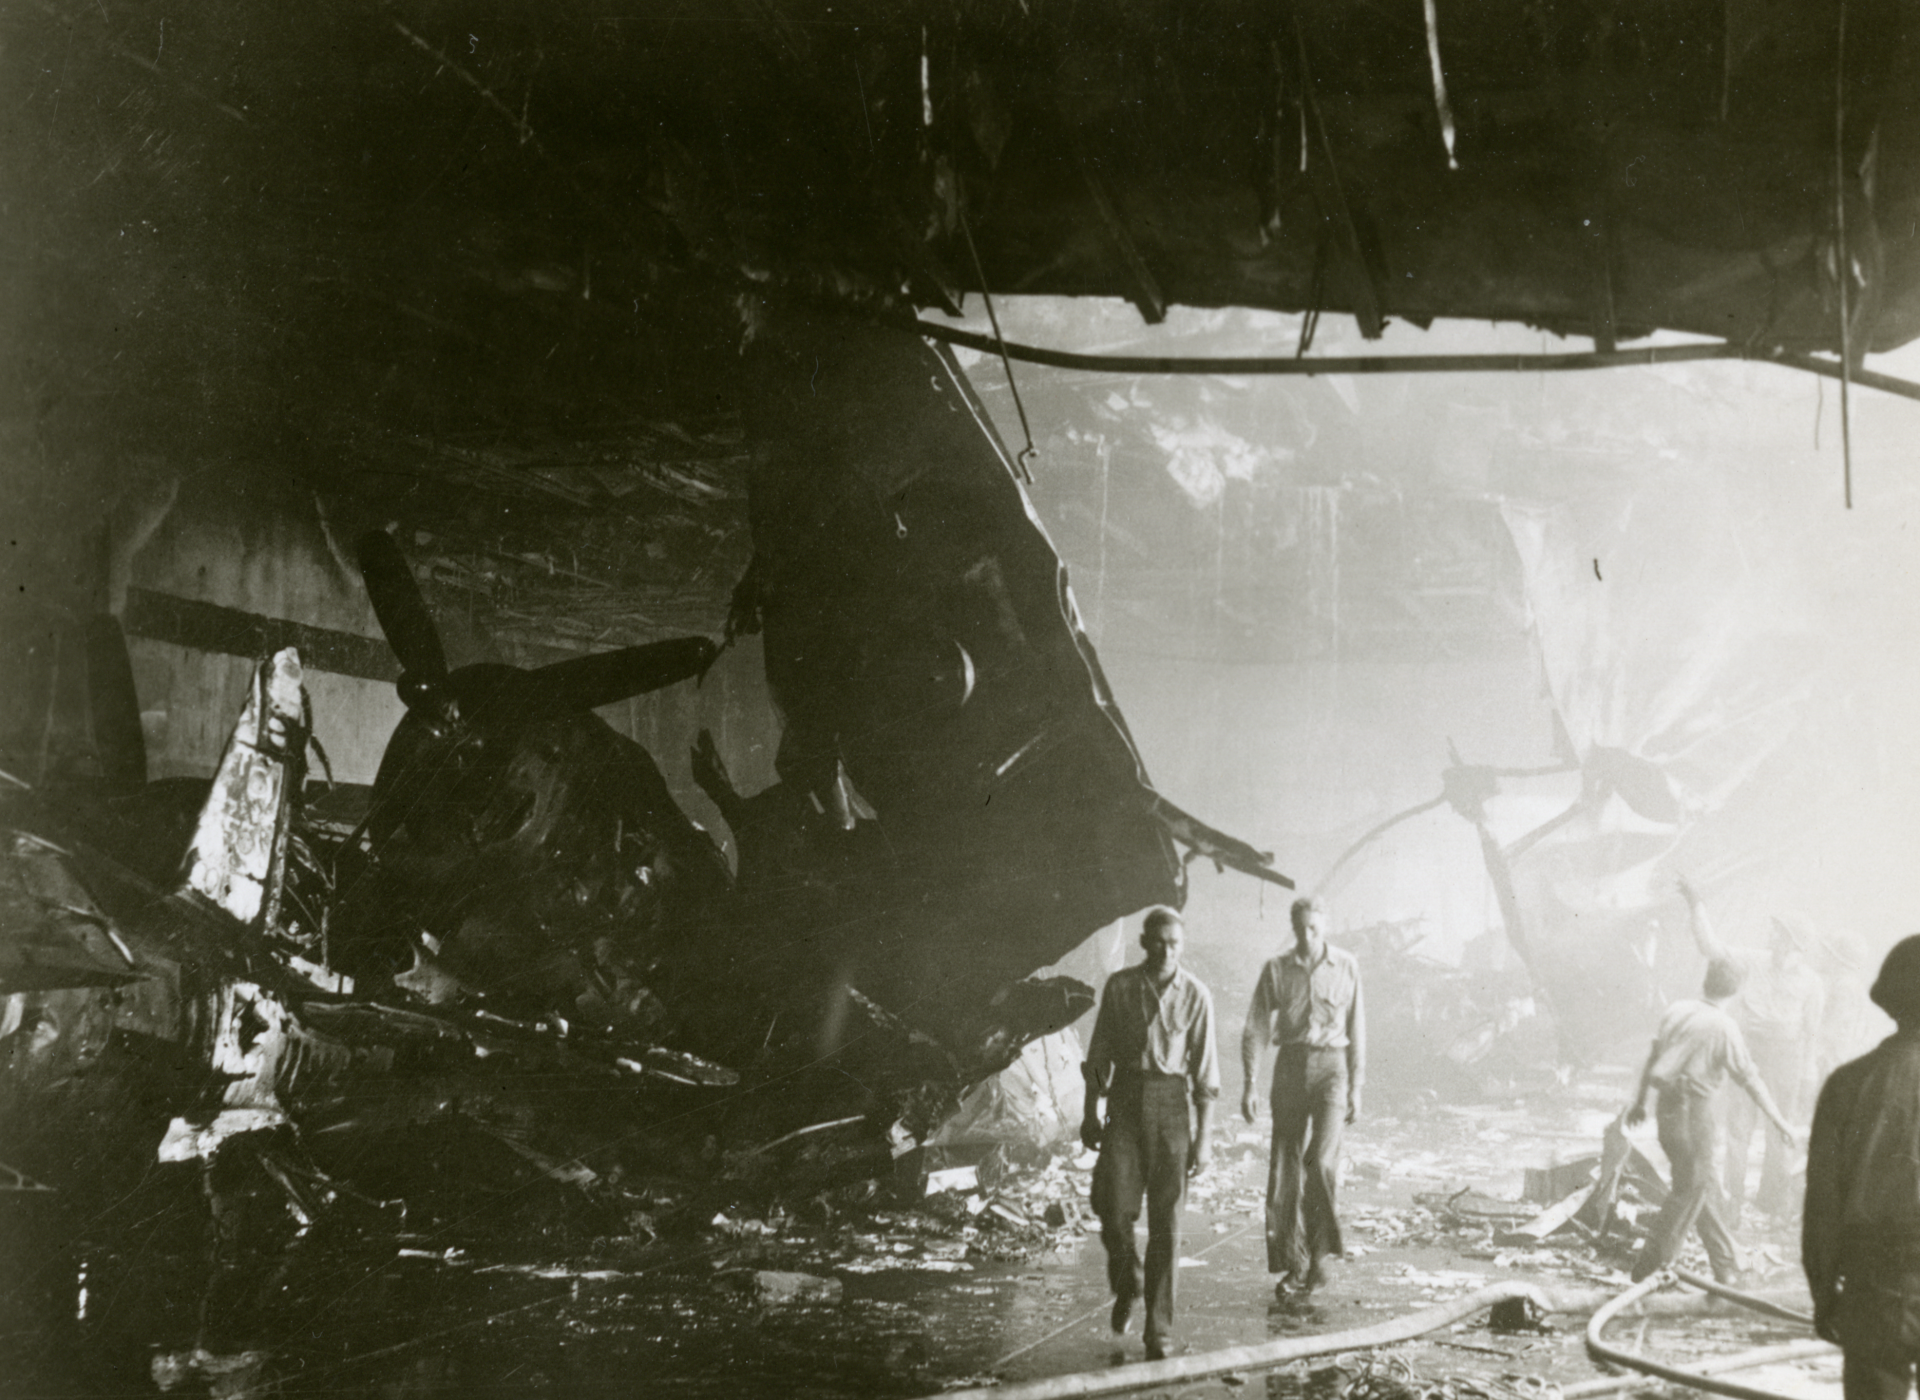 Sailors walk through the wrecked hangar deck of USS Bunker Hill (CV-17) following a kamikaze attack during the Battle of Okinawa. US Navy official photograph. The National WWII Museum, Gift of Thomas J. Hanlon, Accession #2013.495.412